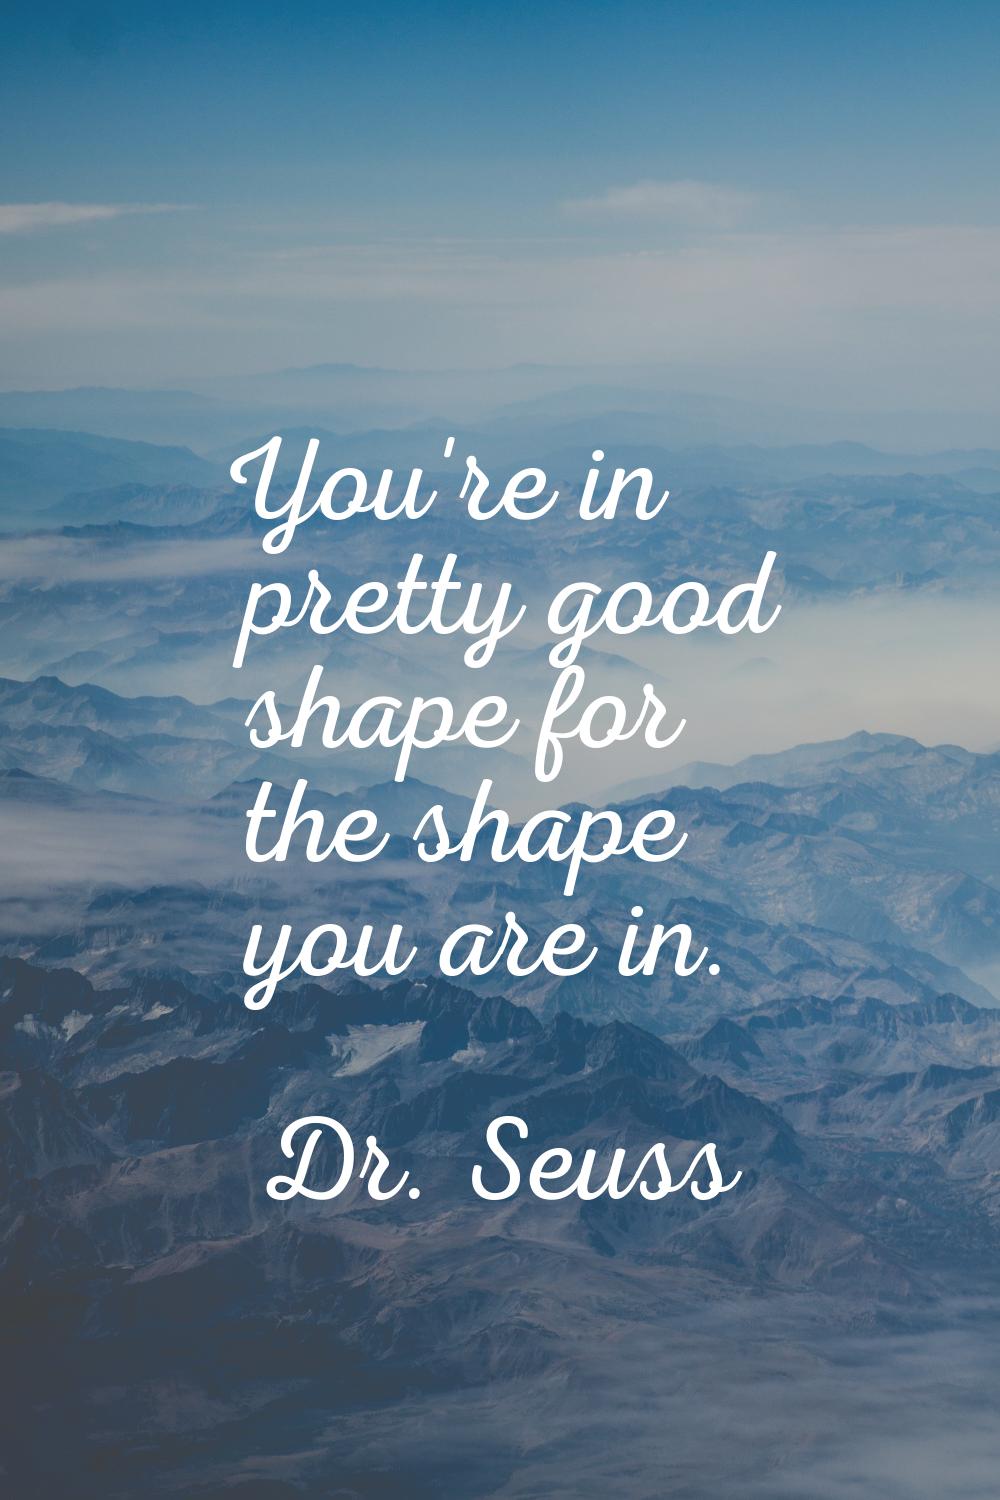 You're in pretty good shape for the shape you are in.